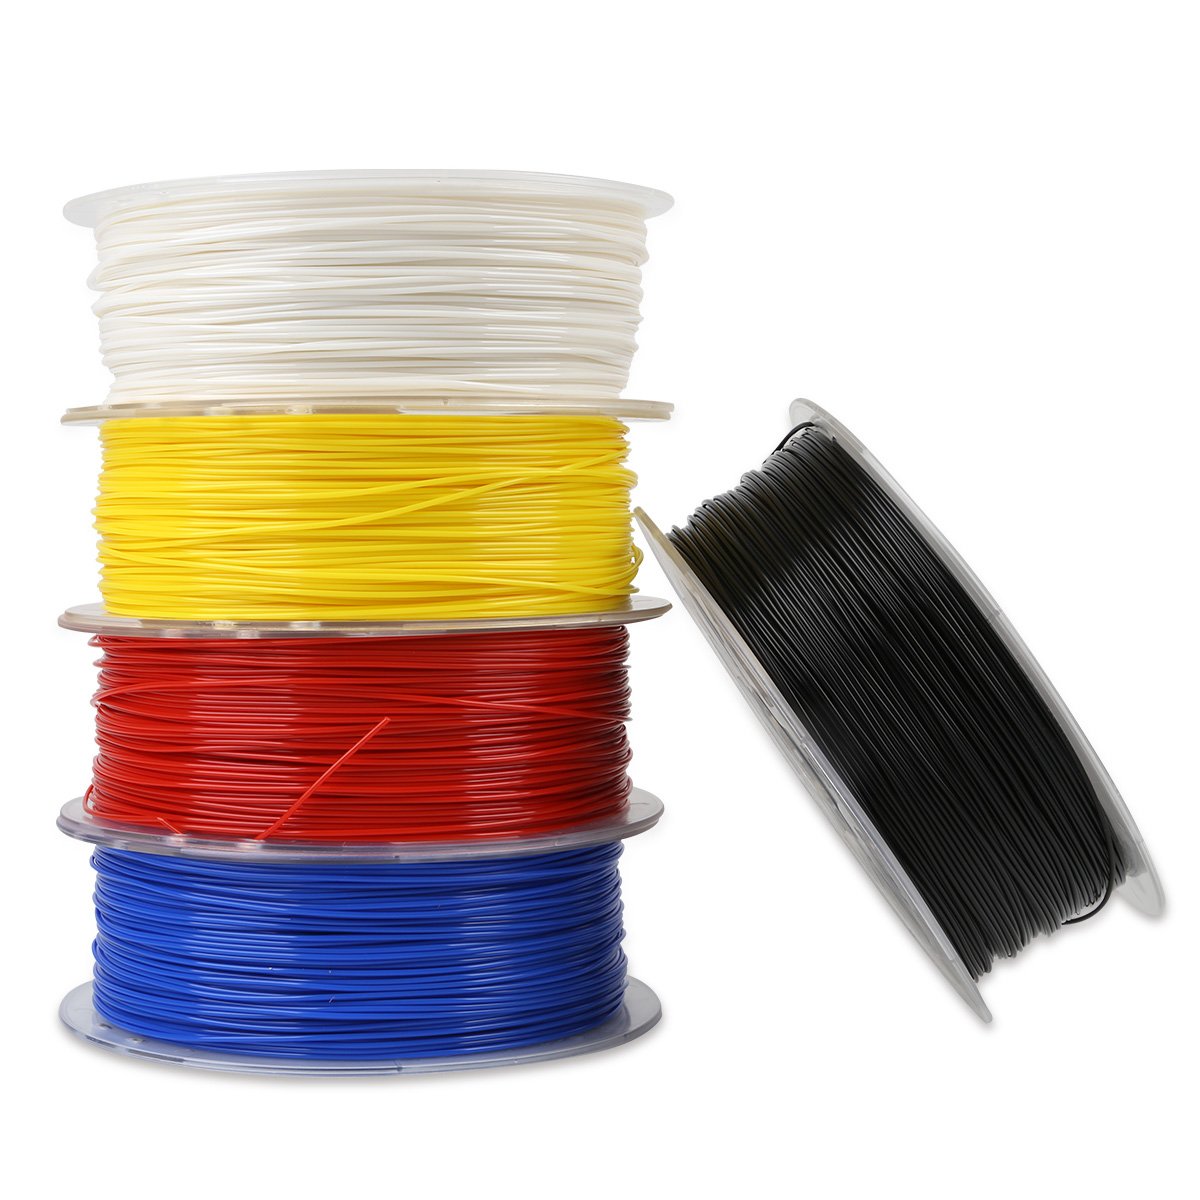 Creality 3D® White/Black/Yellow/Blue/Red 1KG 1.75mm PLA Filament For 3D Printer 2